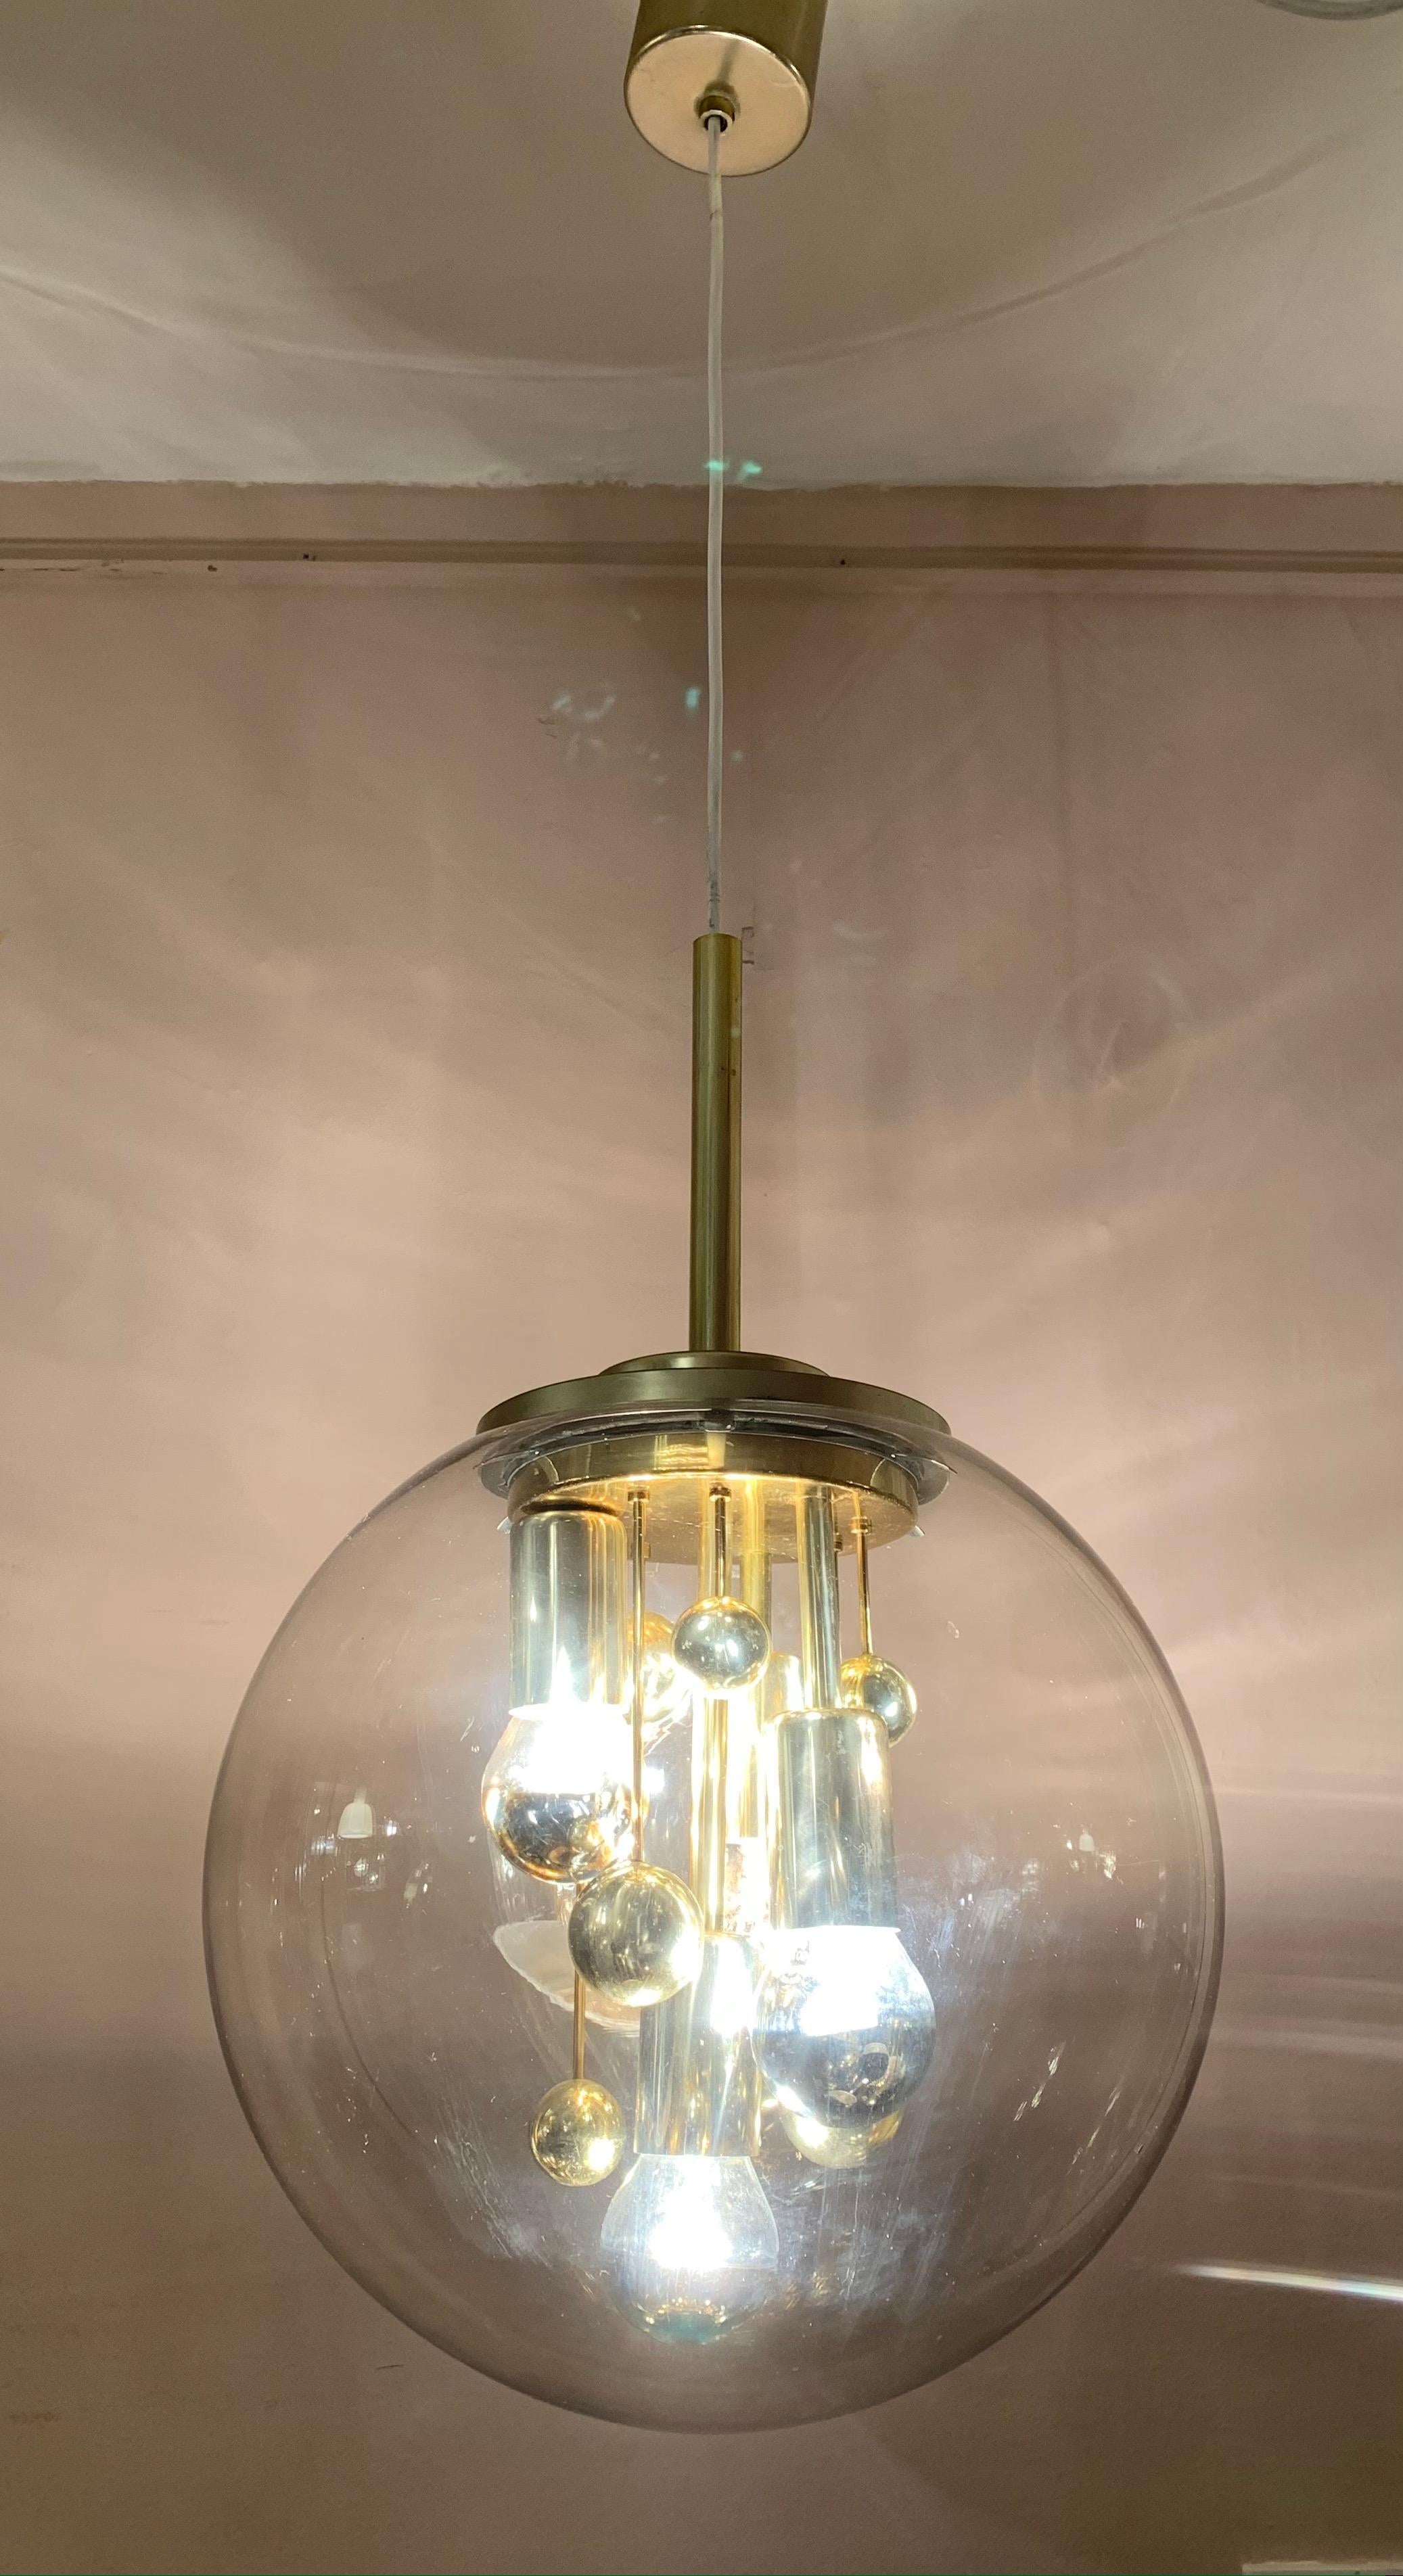 Circa 1970s large globe pendant hanging light which was manufactured by Doria Leuchten in Germany. The brass fitting that sits inside the smoked-glass hand blown globe has vertical rods of different sizes and lengths with spheres at the end of each